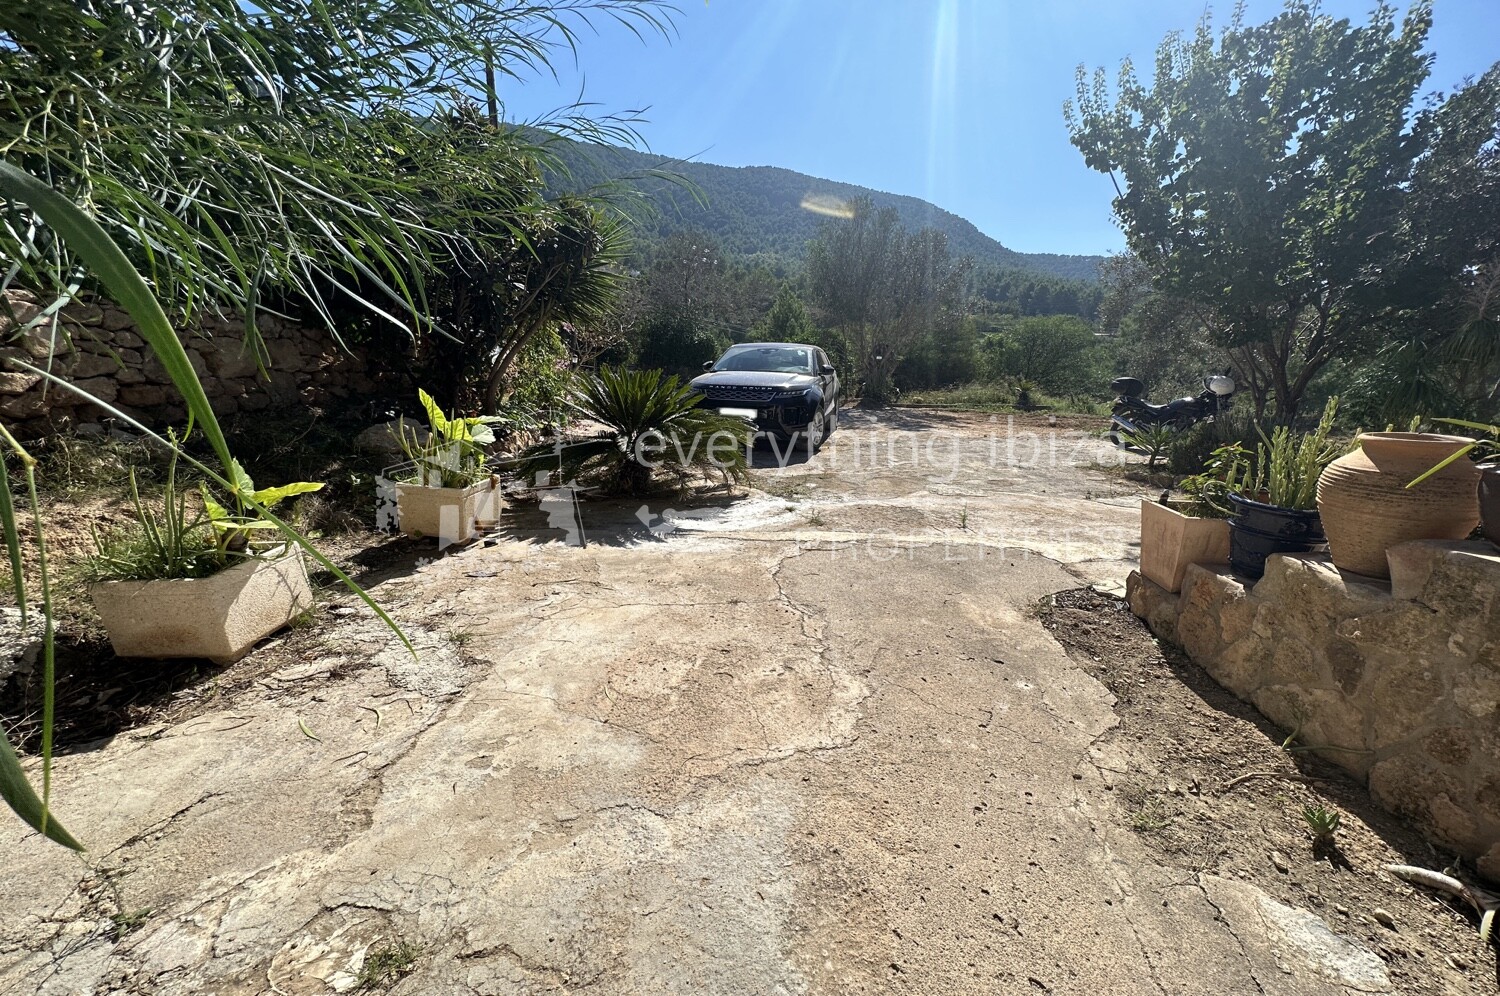 Charming Finca on a Large Plot with Lovely Views, ref. 1631, for sale in Ibiza by everything ibiza Properties